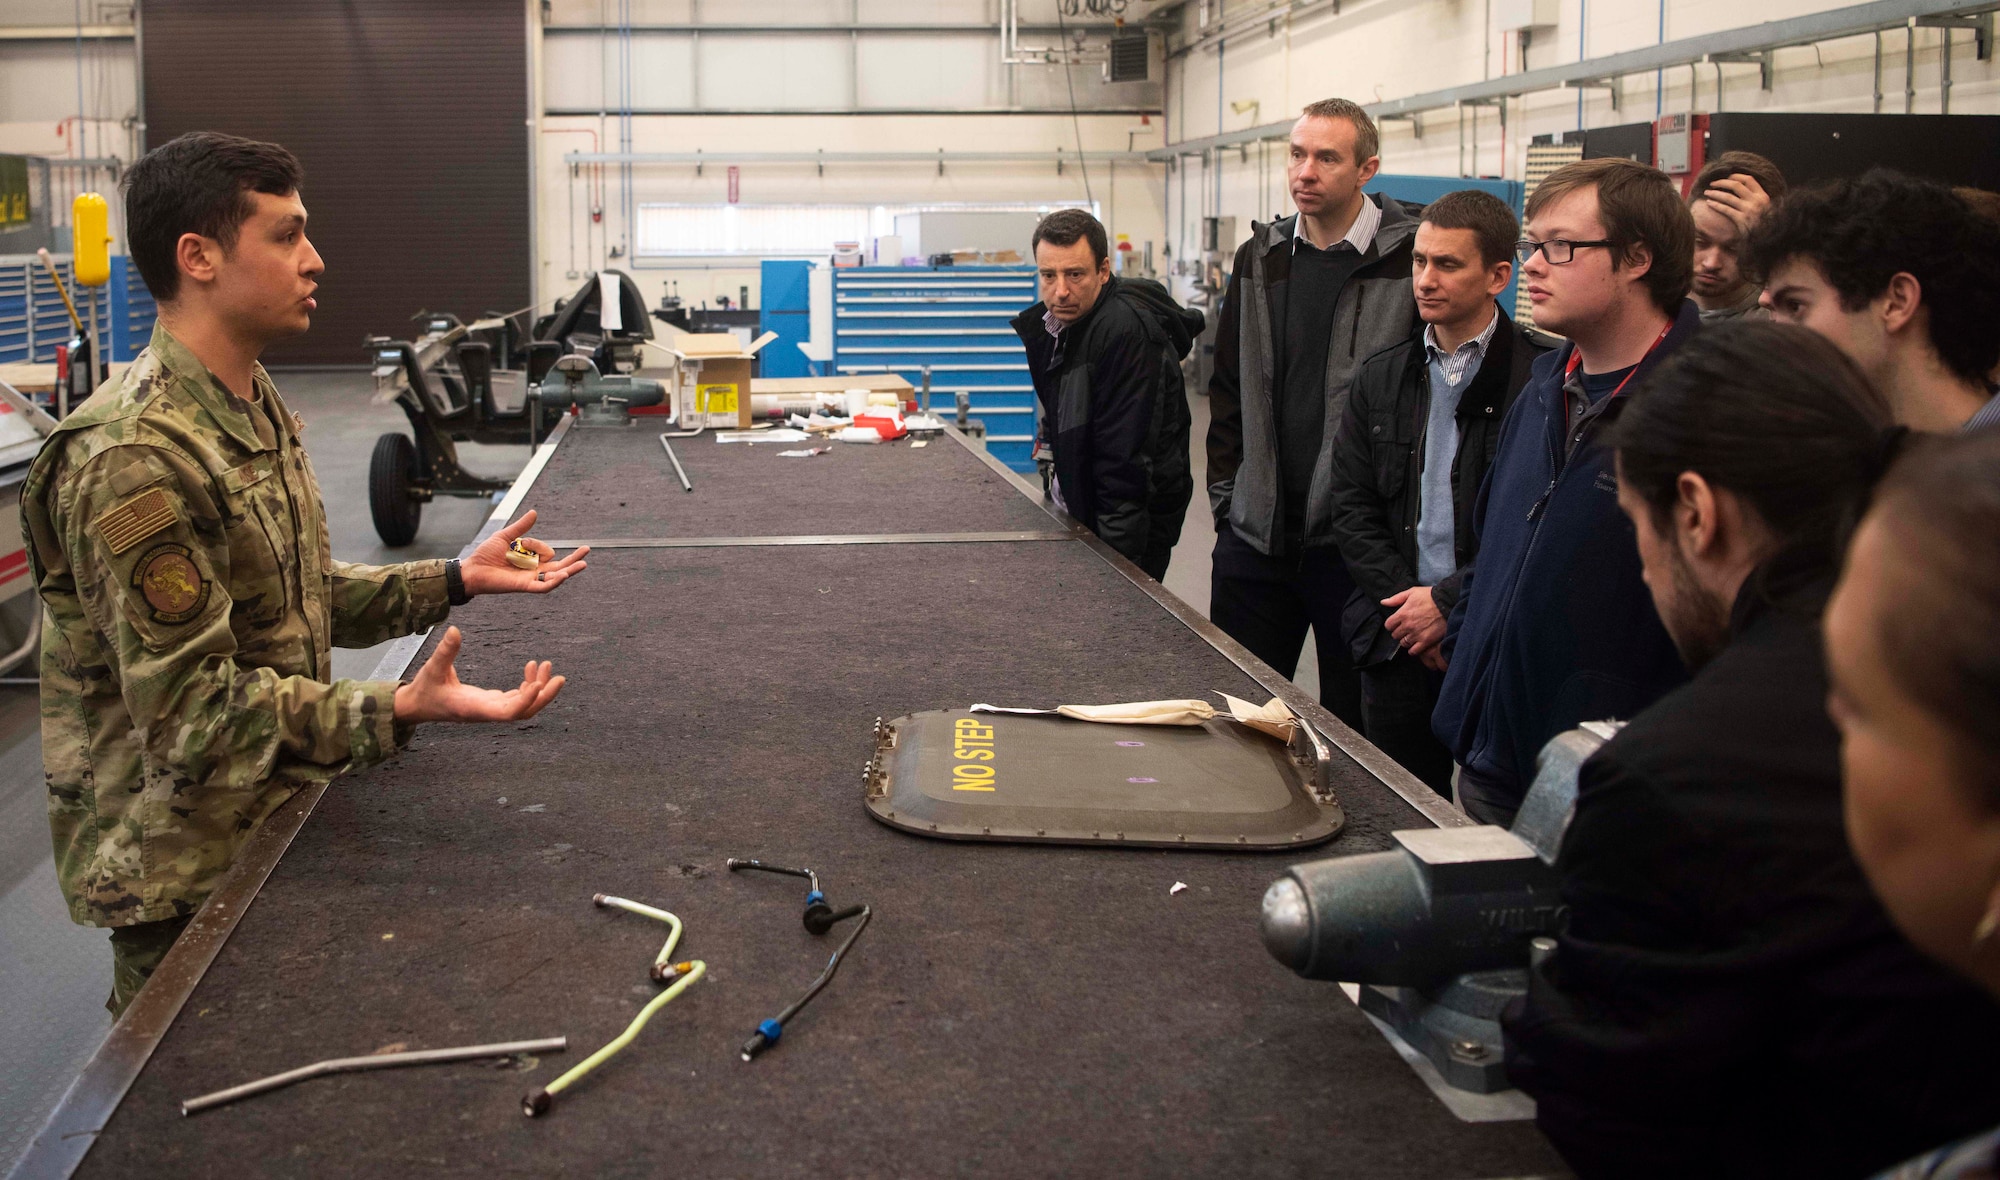 Tech. Sgt. Eric Krause, 100th Maintenance Squadron noncommissioned officer in charge of aircraft structural maintenance, speaks to students from West Suffolk College about a CV-22 carbon fiber composite panel at RAF Mildenhall, England, Feb. 6, 2020. Students toured non-destructive inspection, metals technology and aircraft structural maintenance sections during their visit of the 100th MXS fabrication flight. (U.S. Air Force photo by Airman 1st Class Joseph Barron)